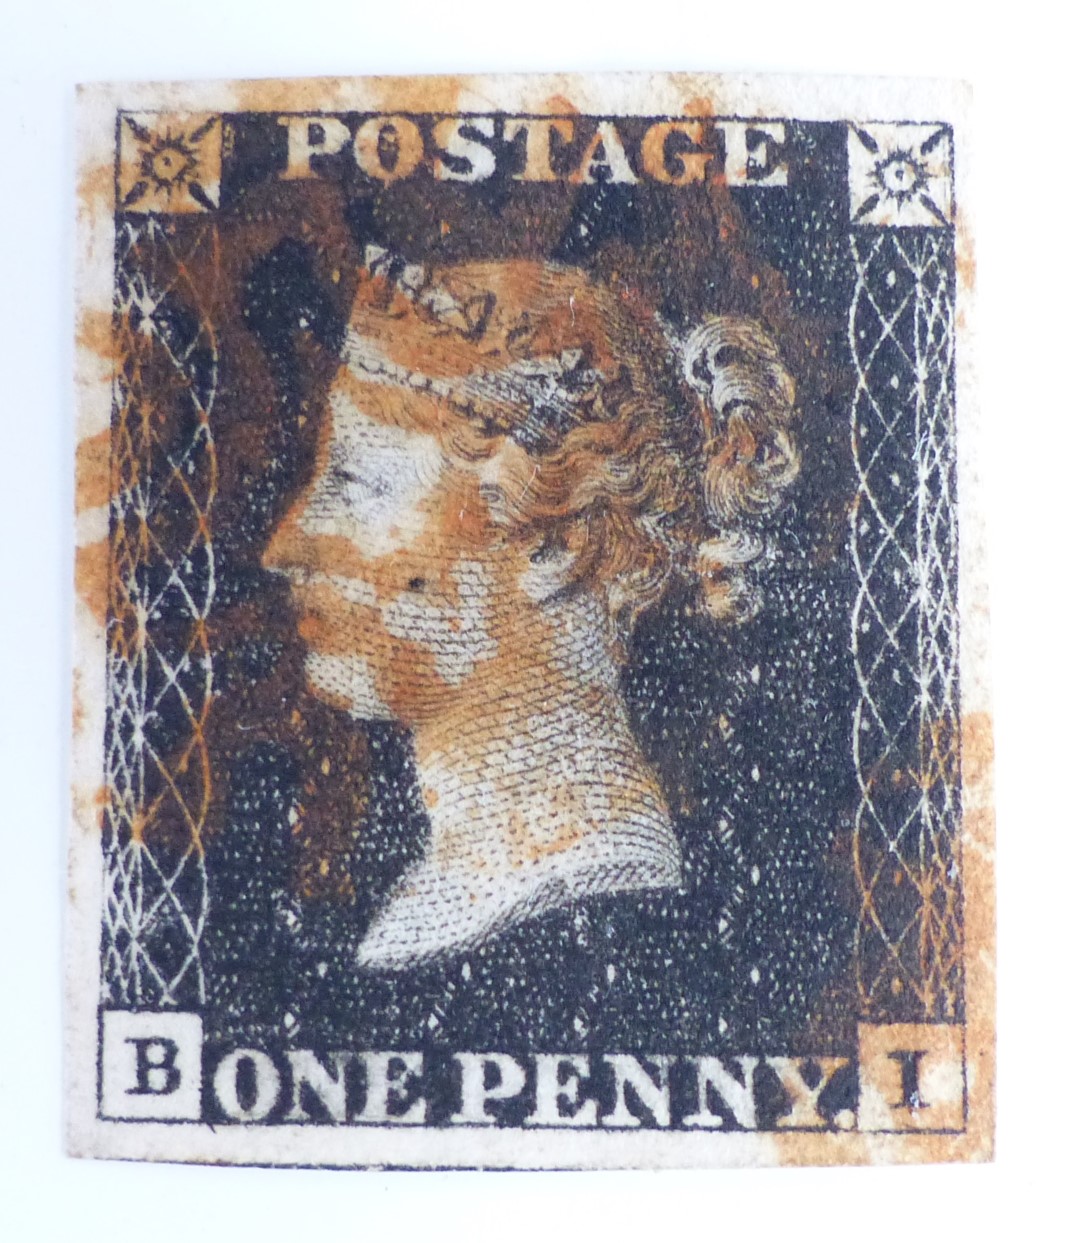 Penny Black, B1. Plate 6. Four clear margins. Plating detail provided by vendor